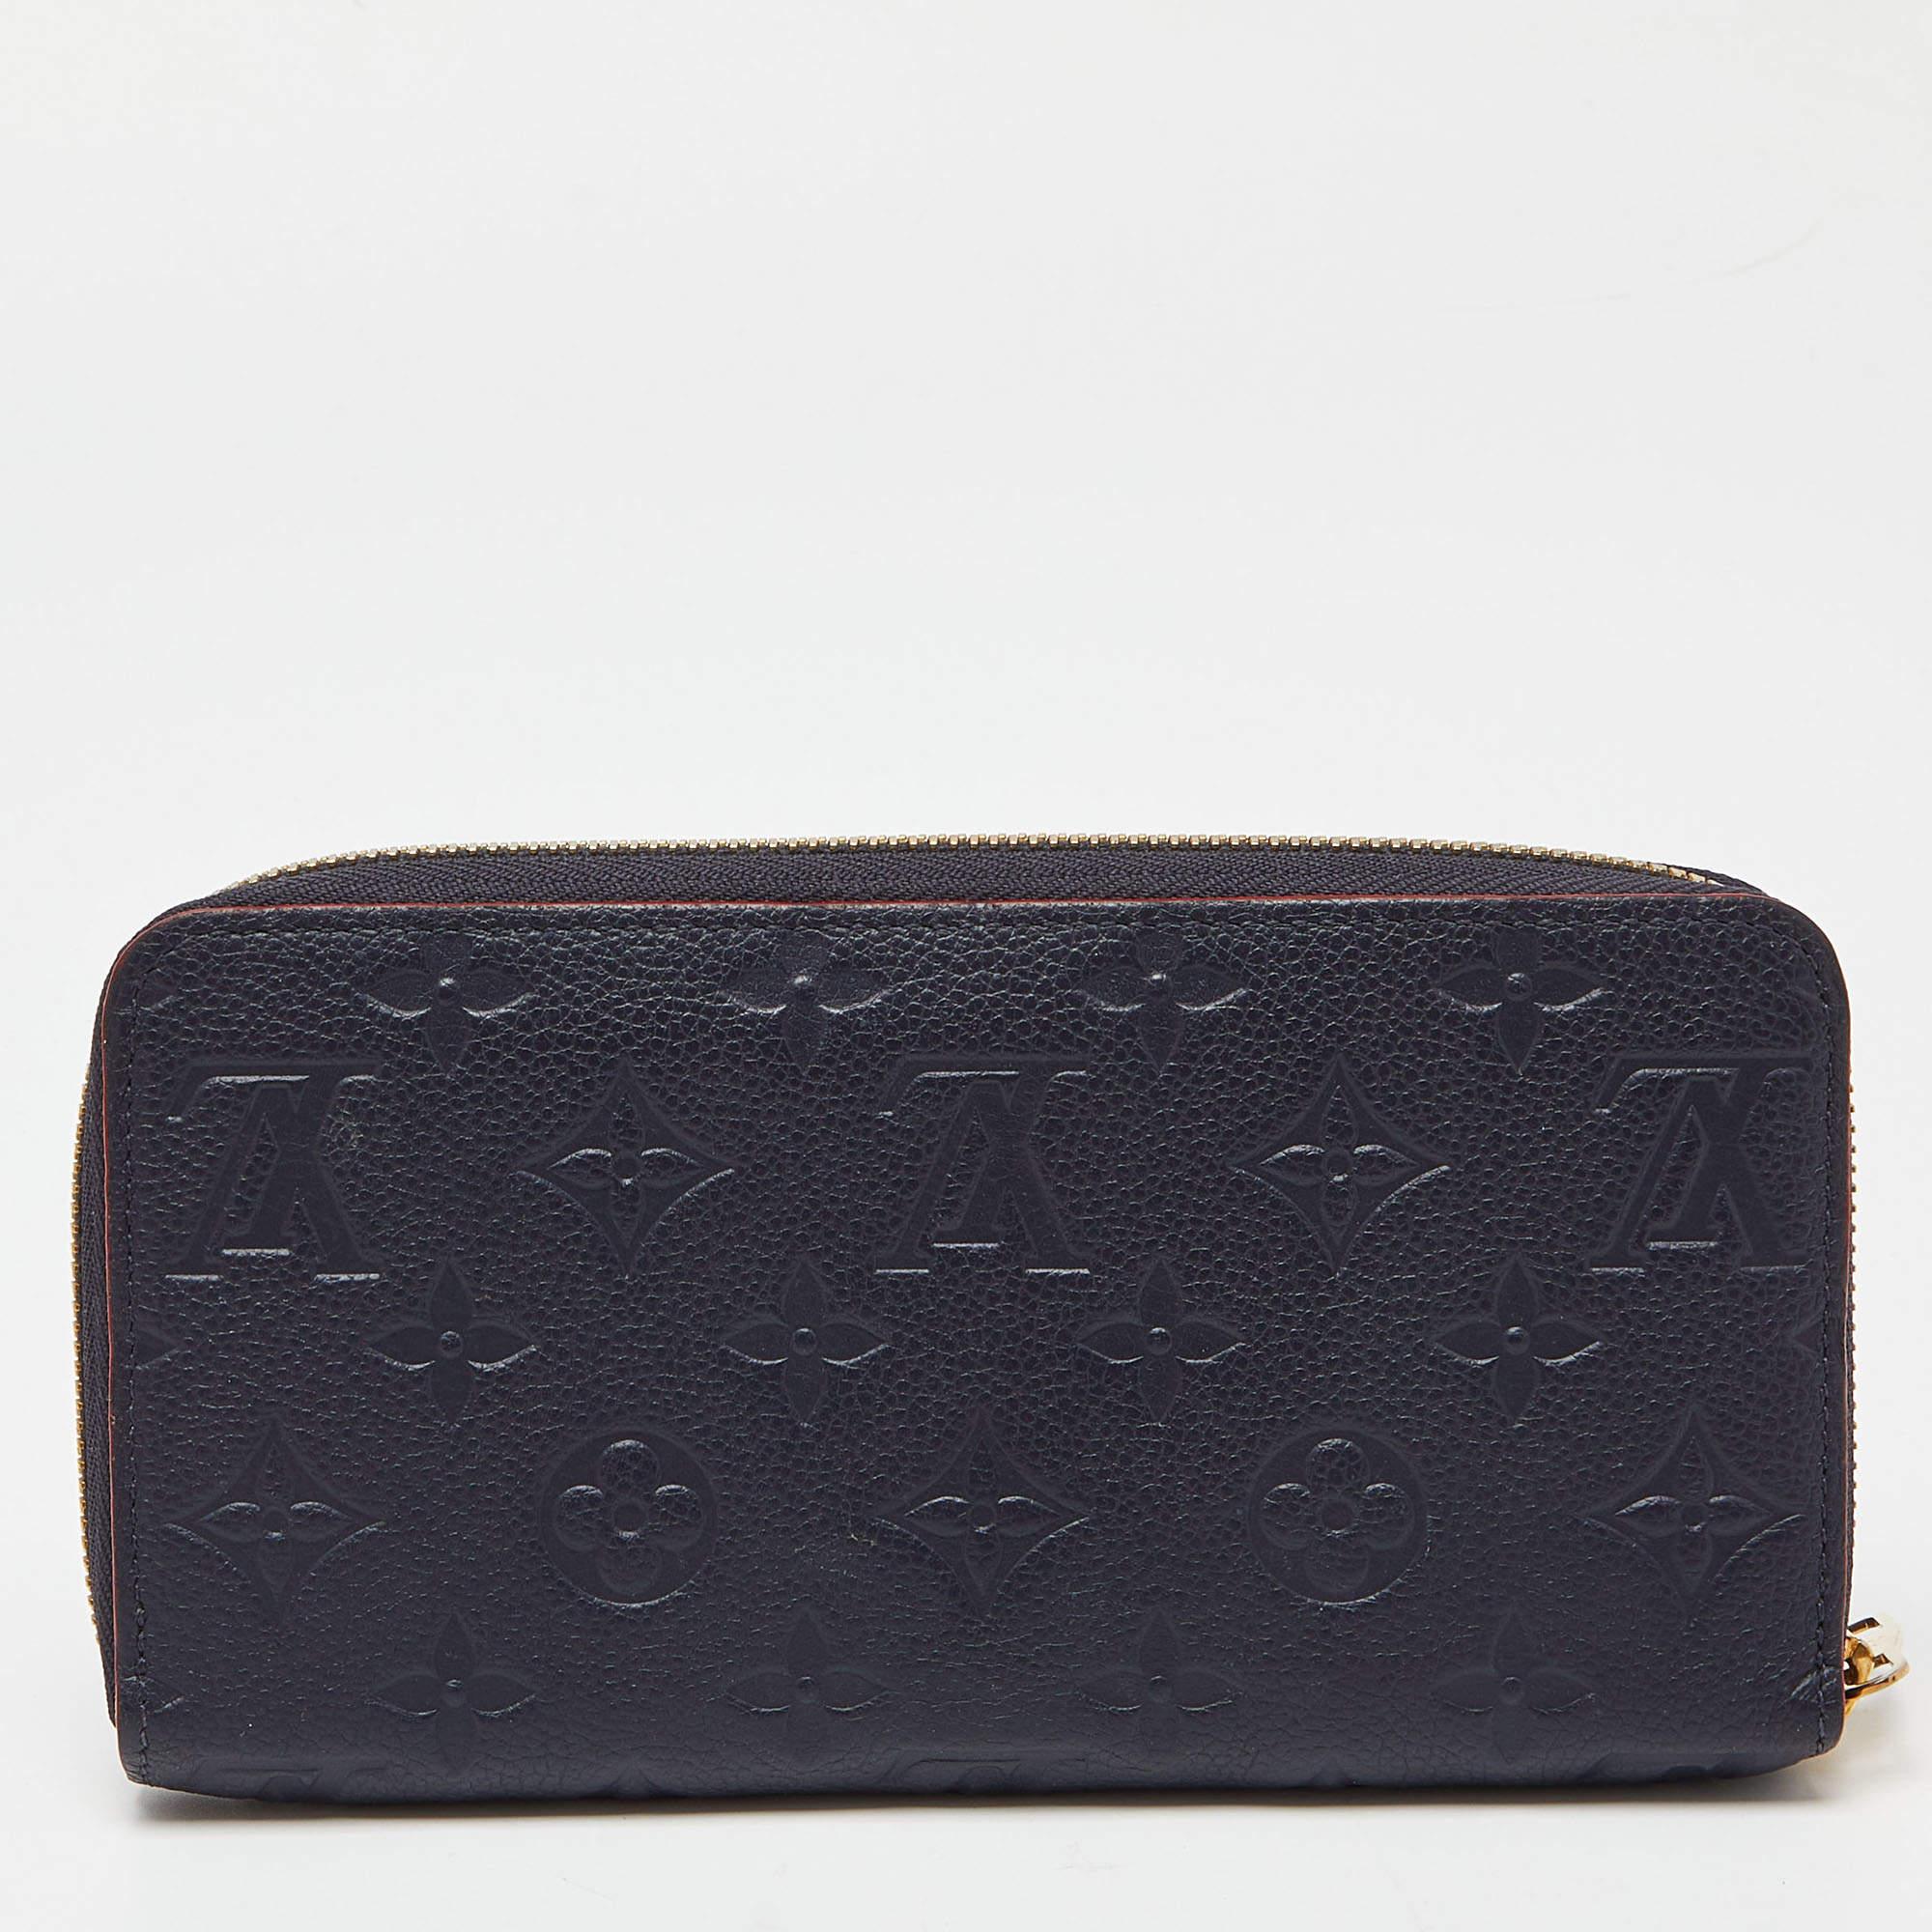 This Louis Vuitton Zippy wallet is conveniently designed for everyday use. Crafted from Monogram Empreint leather, the wallet has a wide zip closure that opens to reveal multiple slots, lined compartments, and a zip pocket for you to arrange your